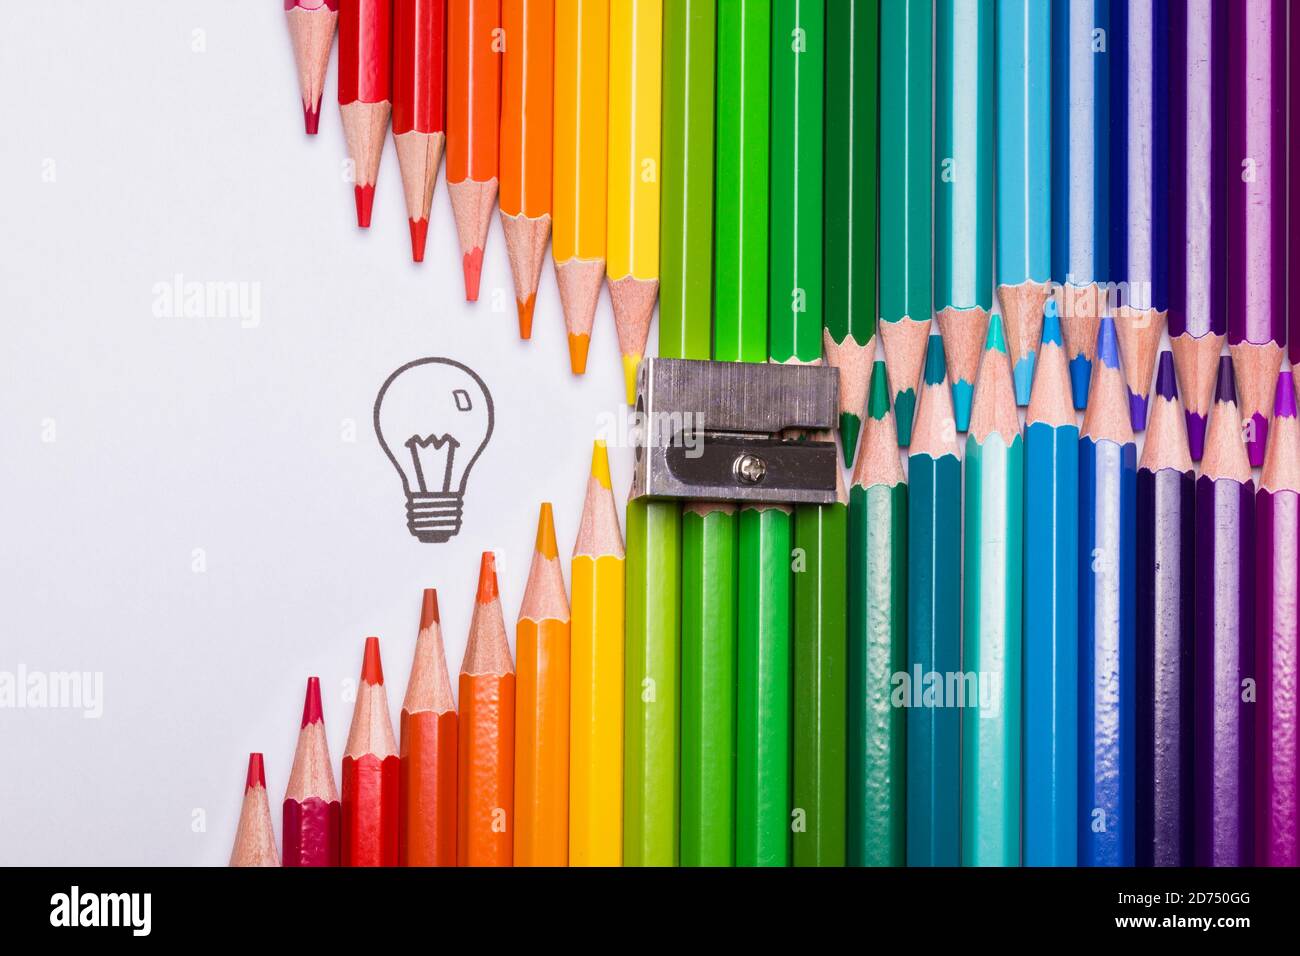 Colour pencils organized in the shape of a zipper opening up to a light bulb as a symbol of creativity Stock Photo